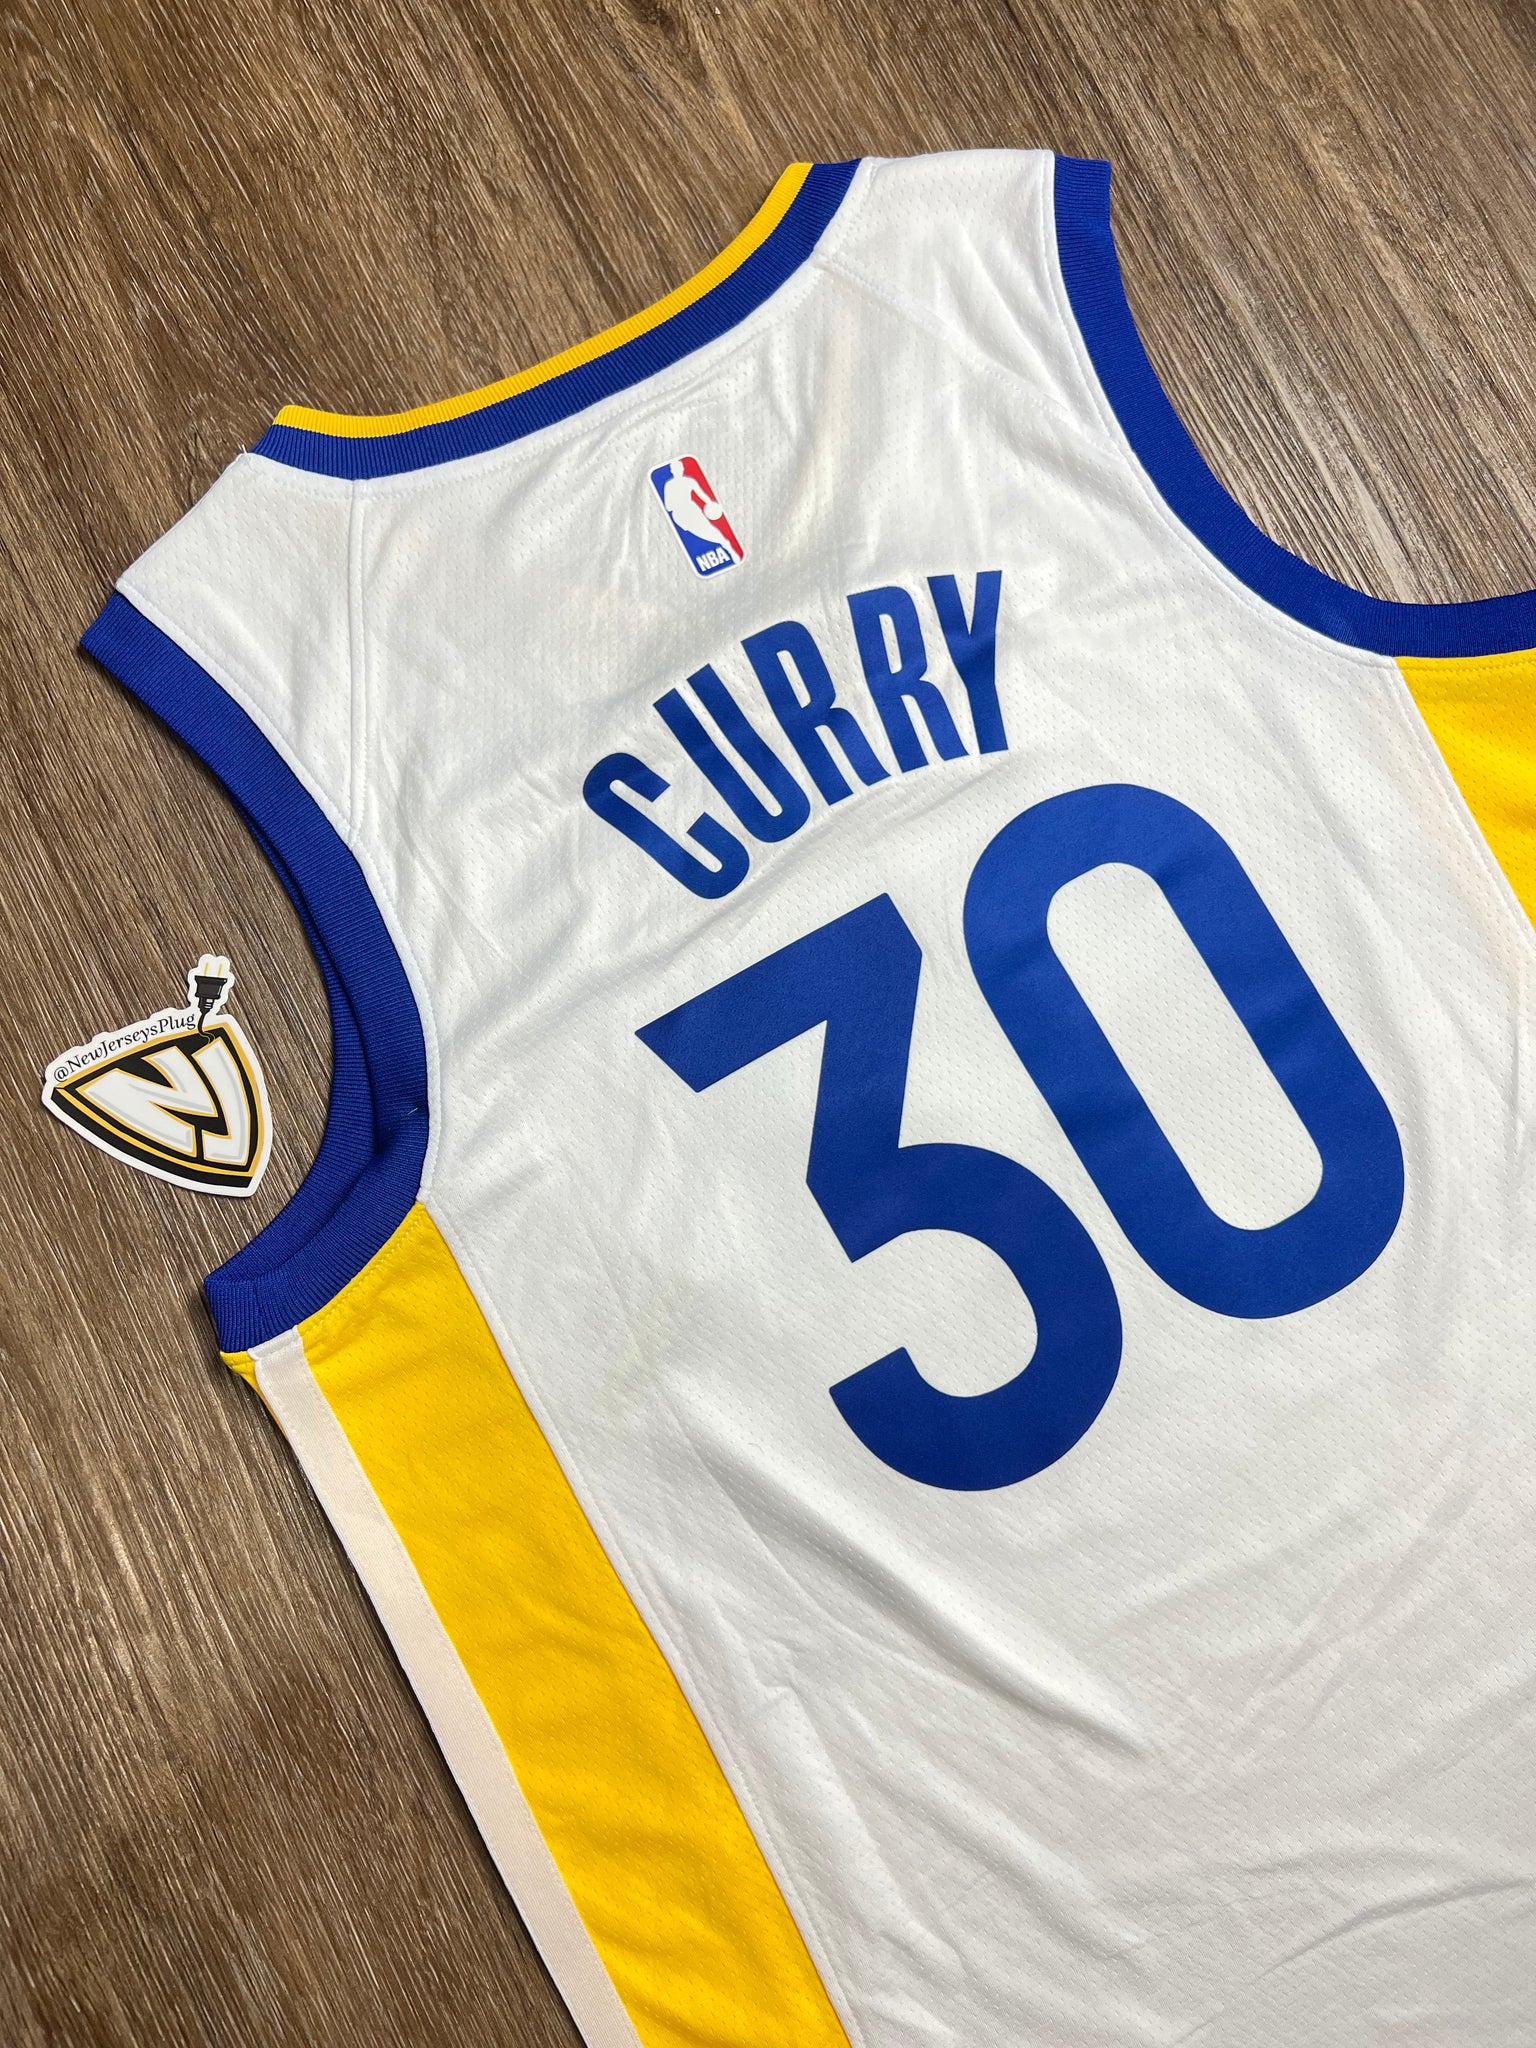 stephen curry home jersey